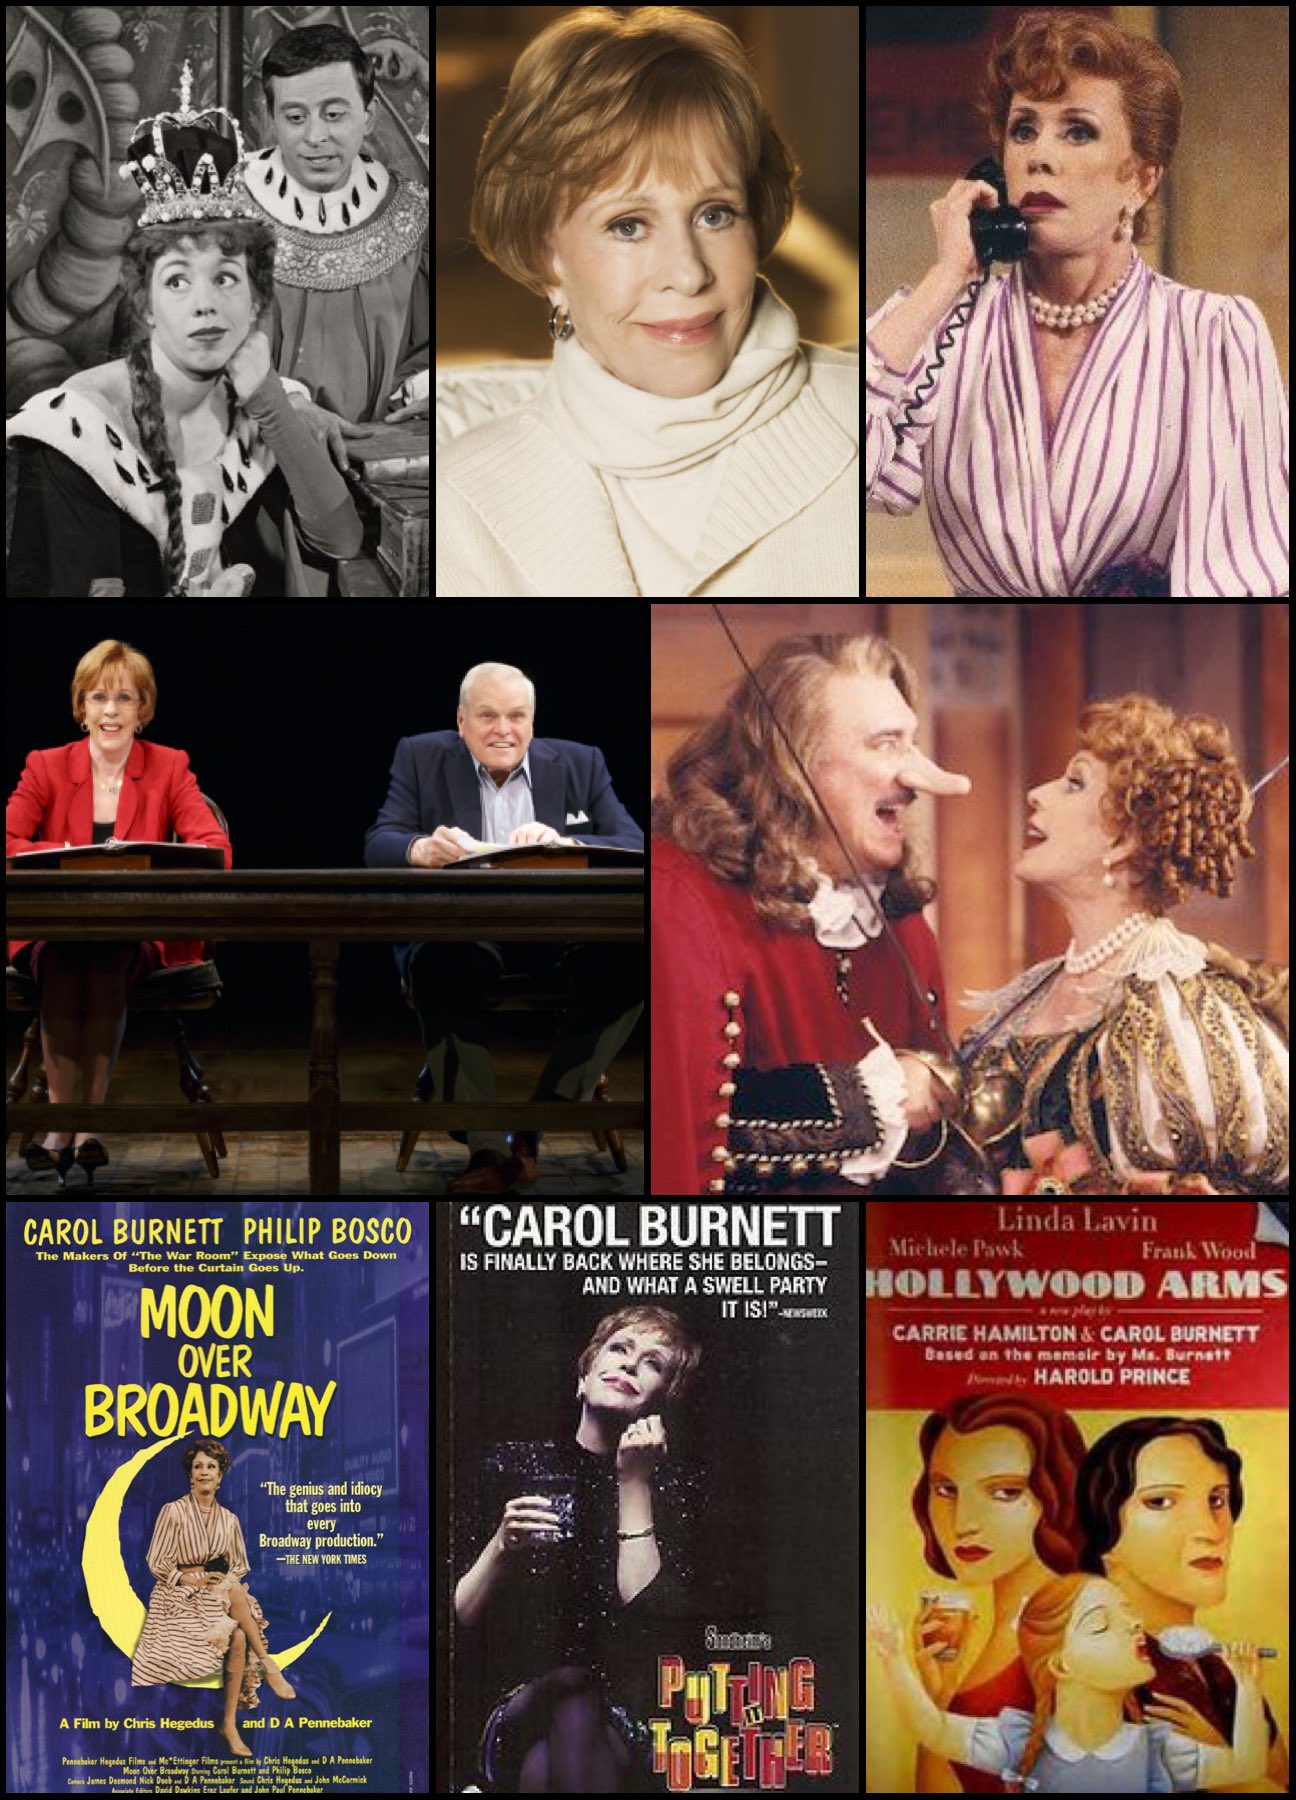 Wishing a Happy Birthday and celebrating the career of the great Carol Burnett! Cheers to this talent artist! 